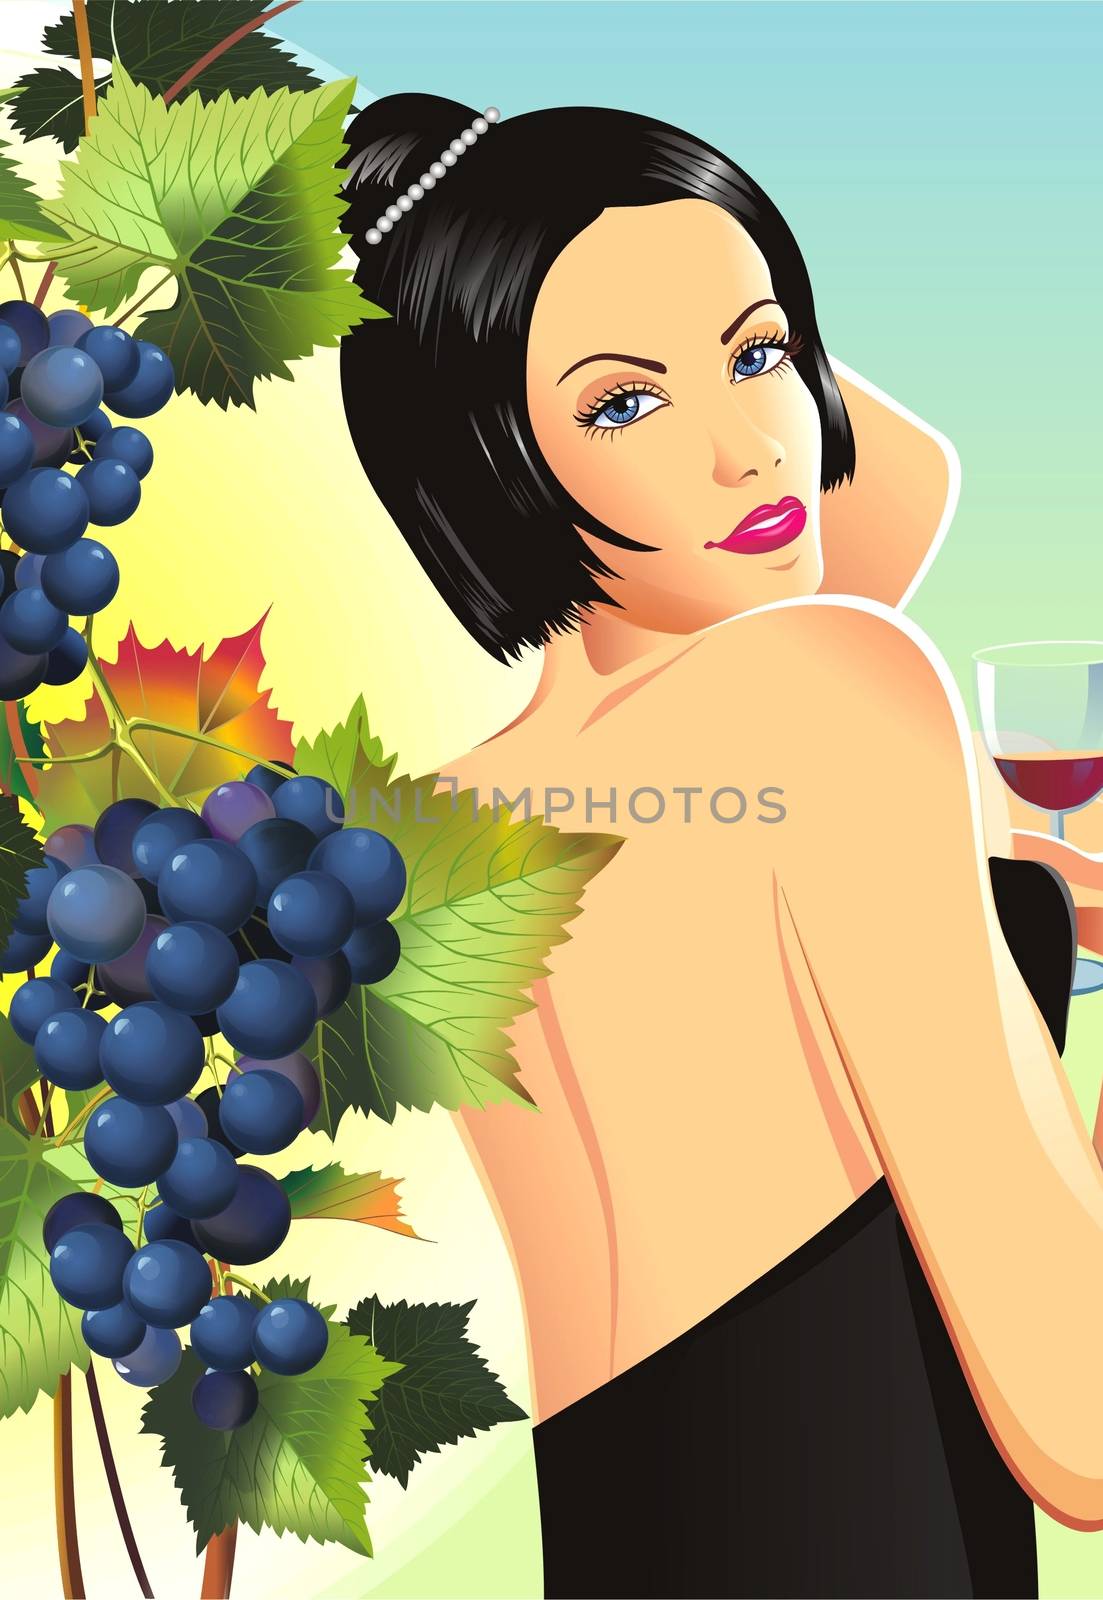 Woman in Winery Between the Grapes. Woman with Wine in Glass Tasting Wine. Vineyard Raster Illustration.